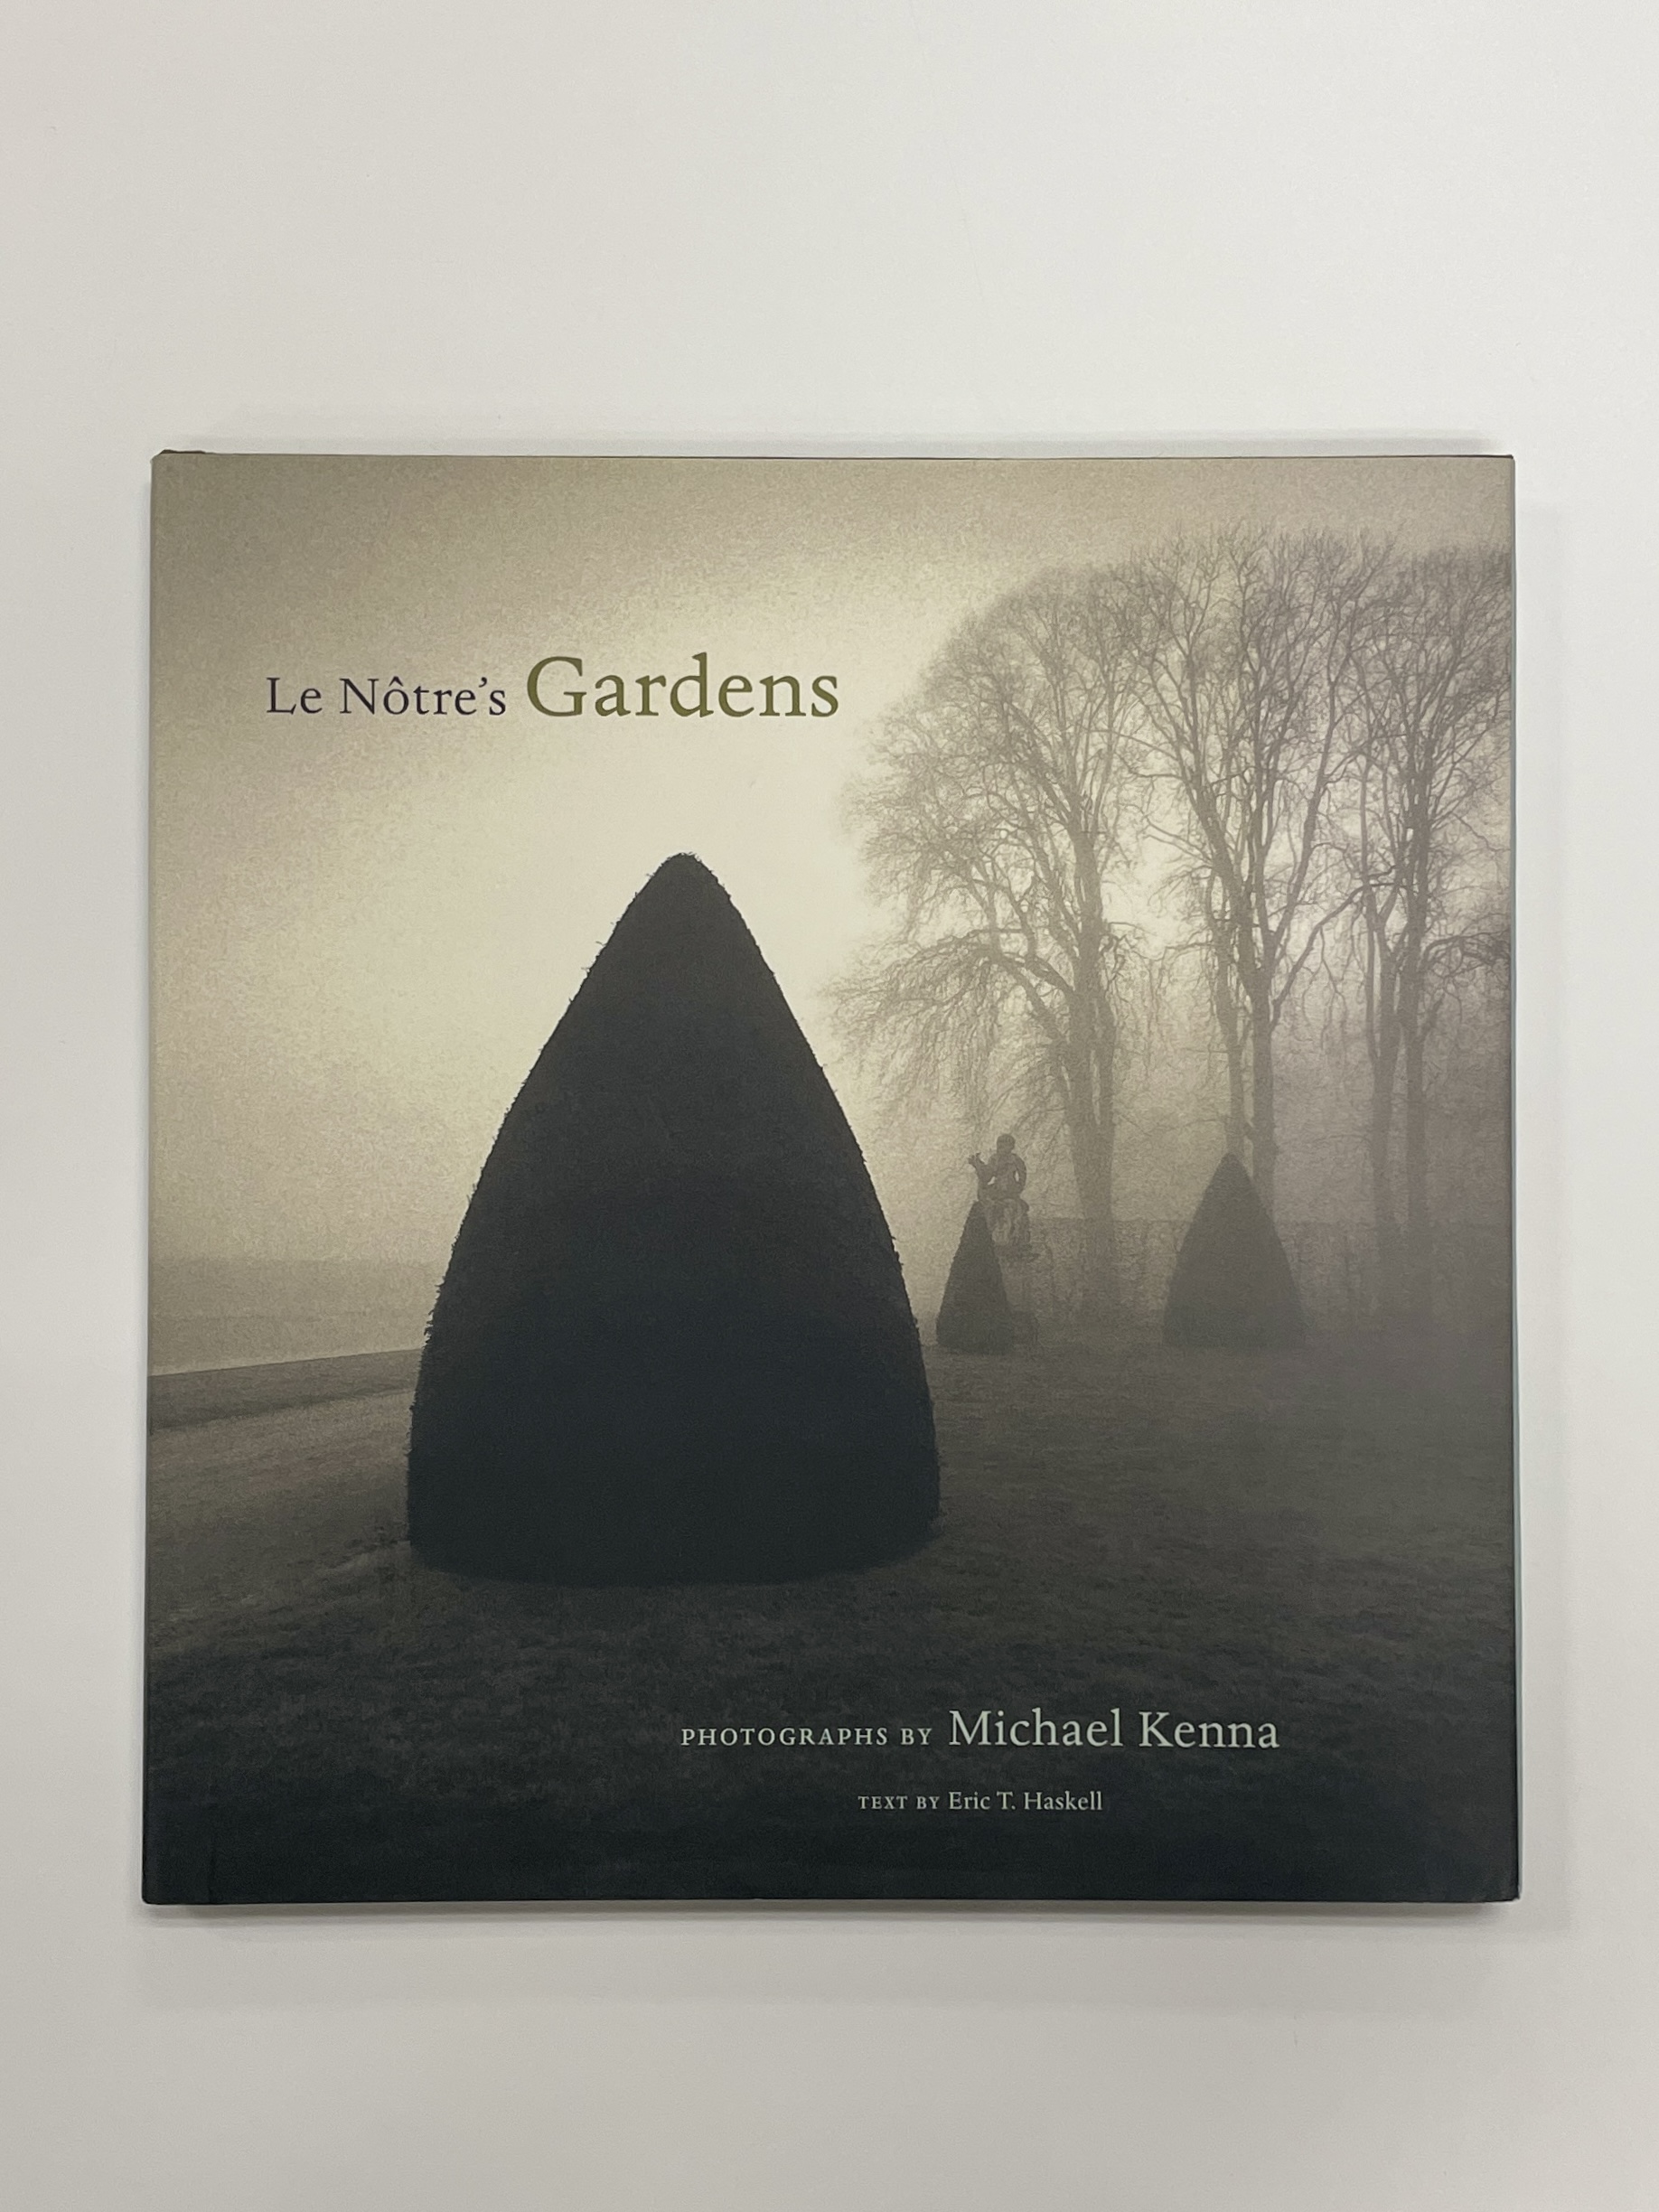 PHOTOGRAPHY BOOKS - MICHAEL KENNA - Image 5 of 9